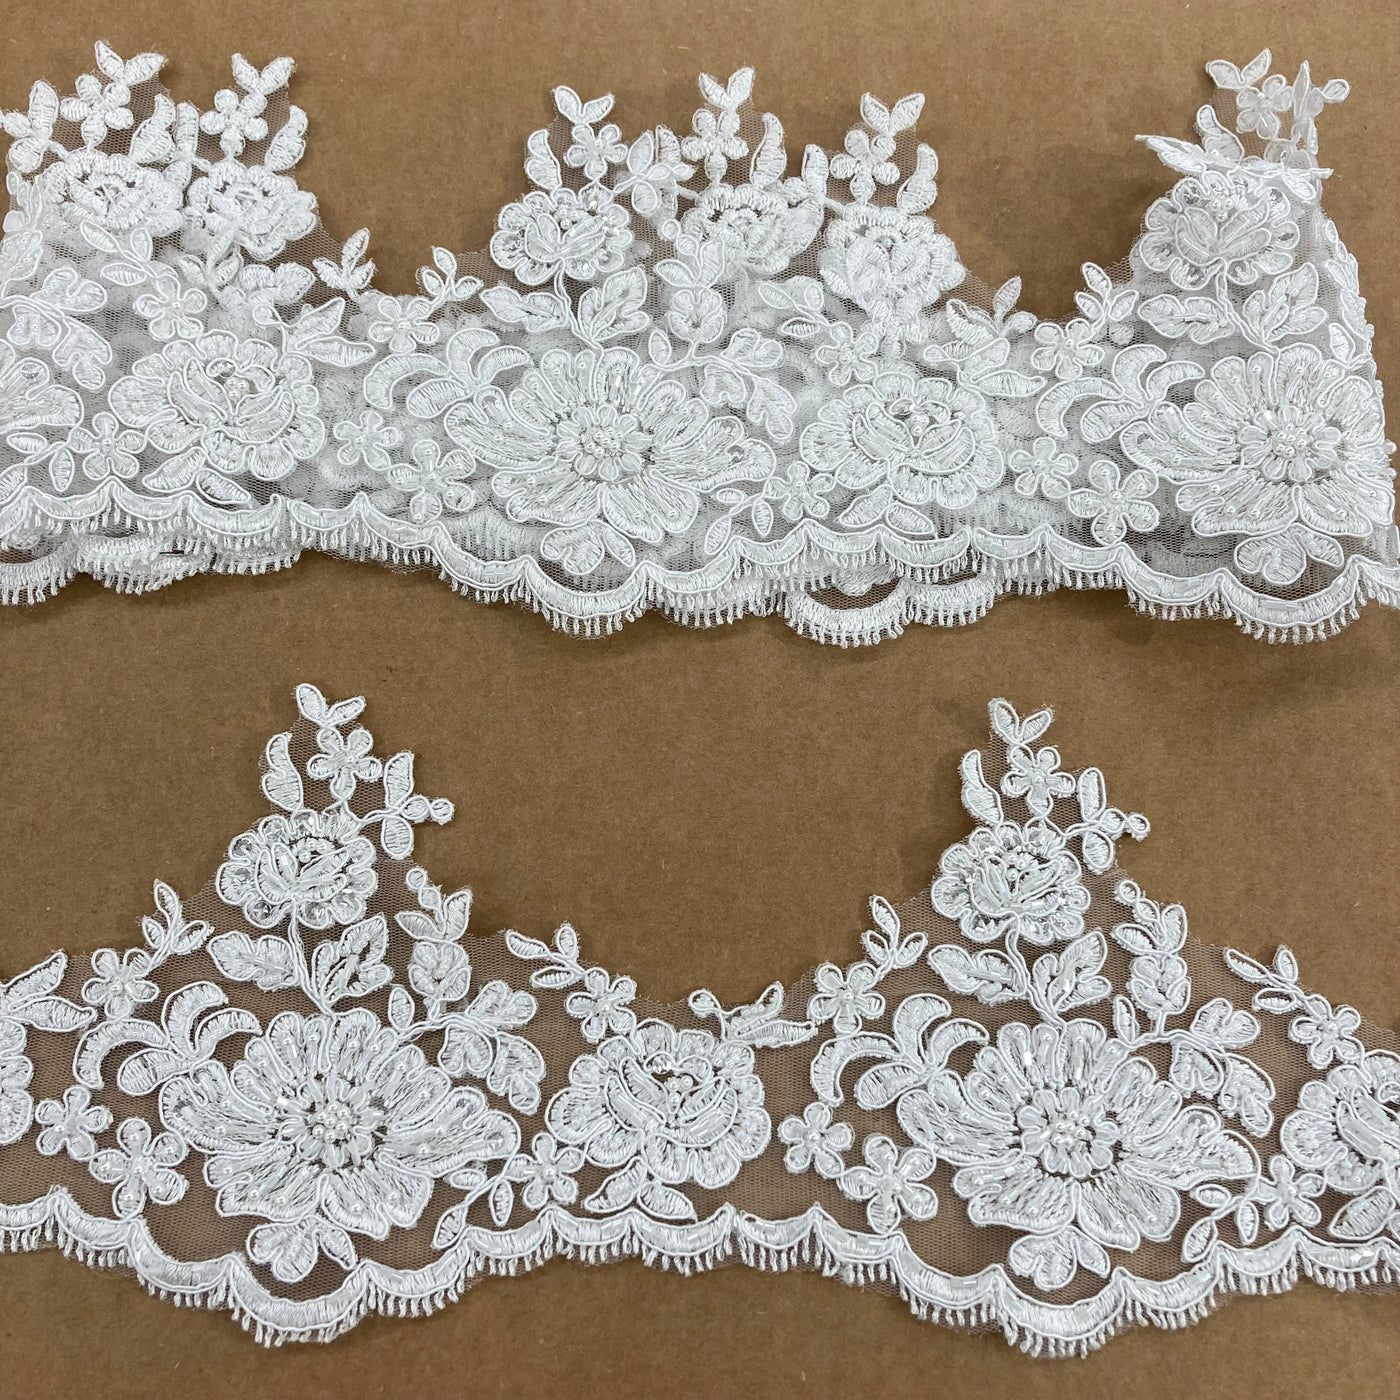 Corded & Beaded Floral Embroidered lace Trimming. Lace Usa